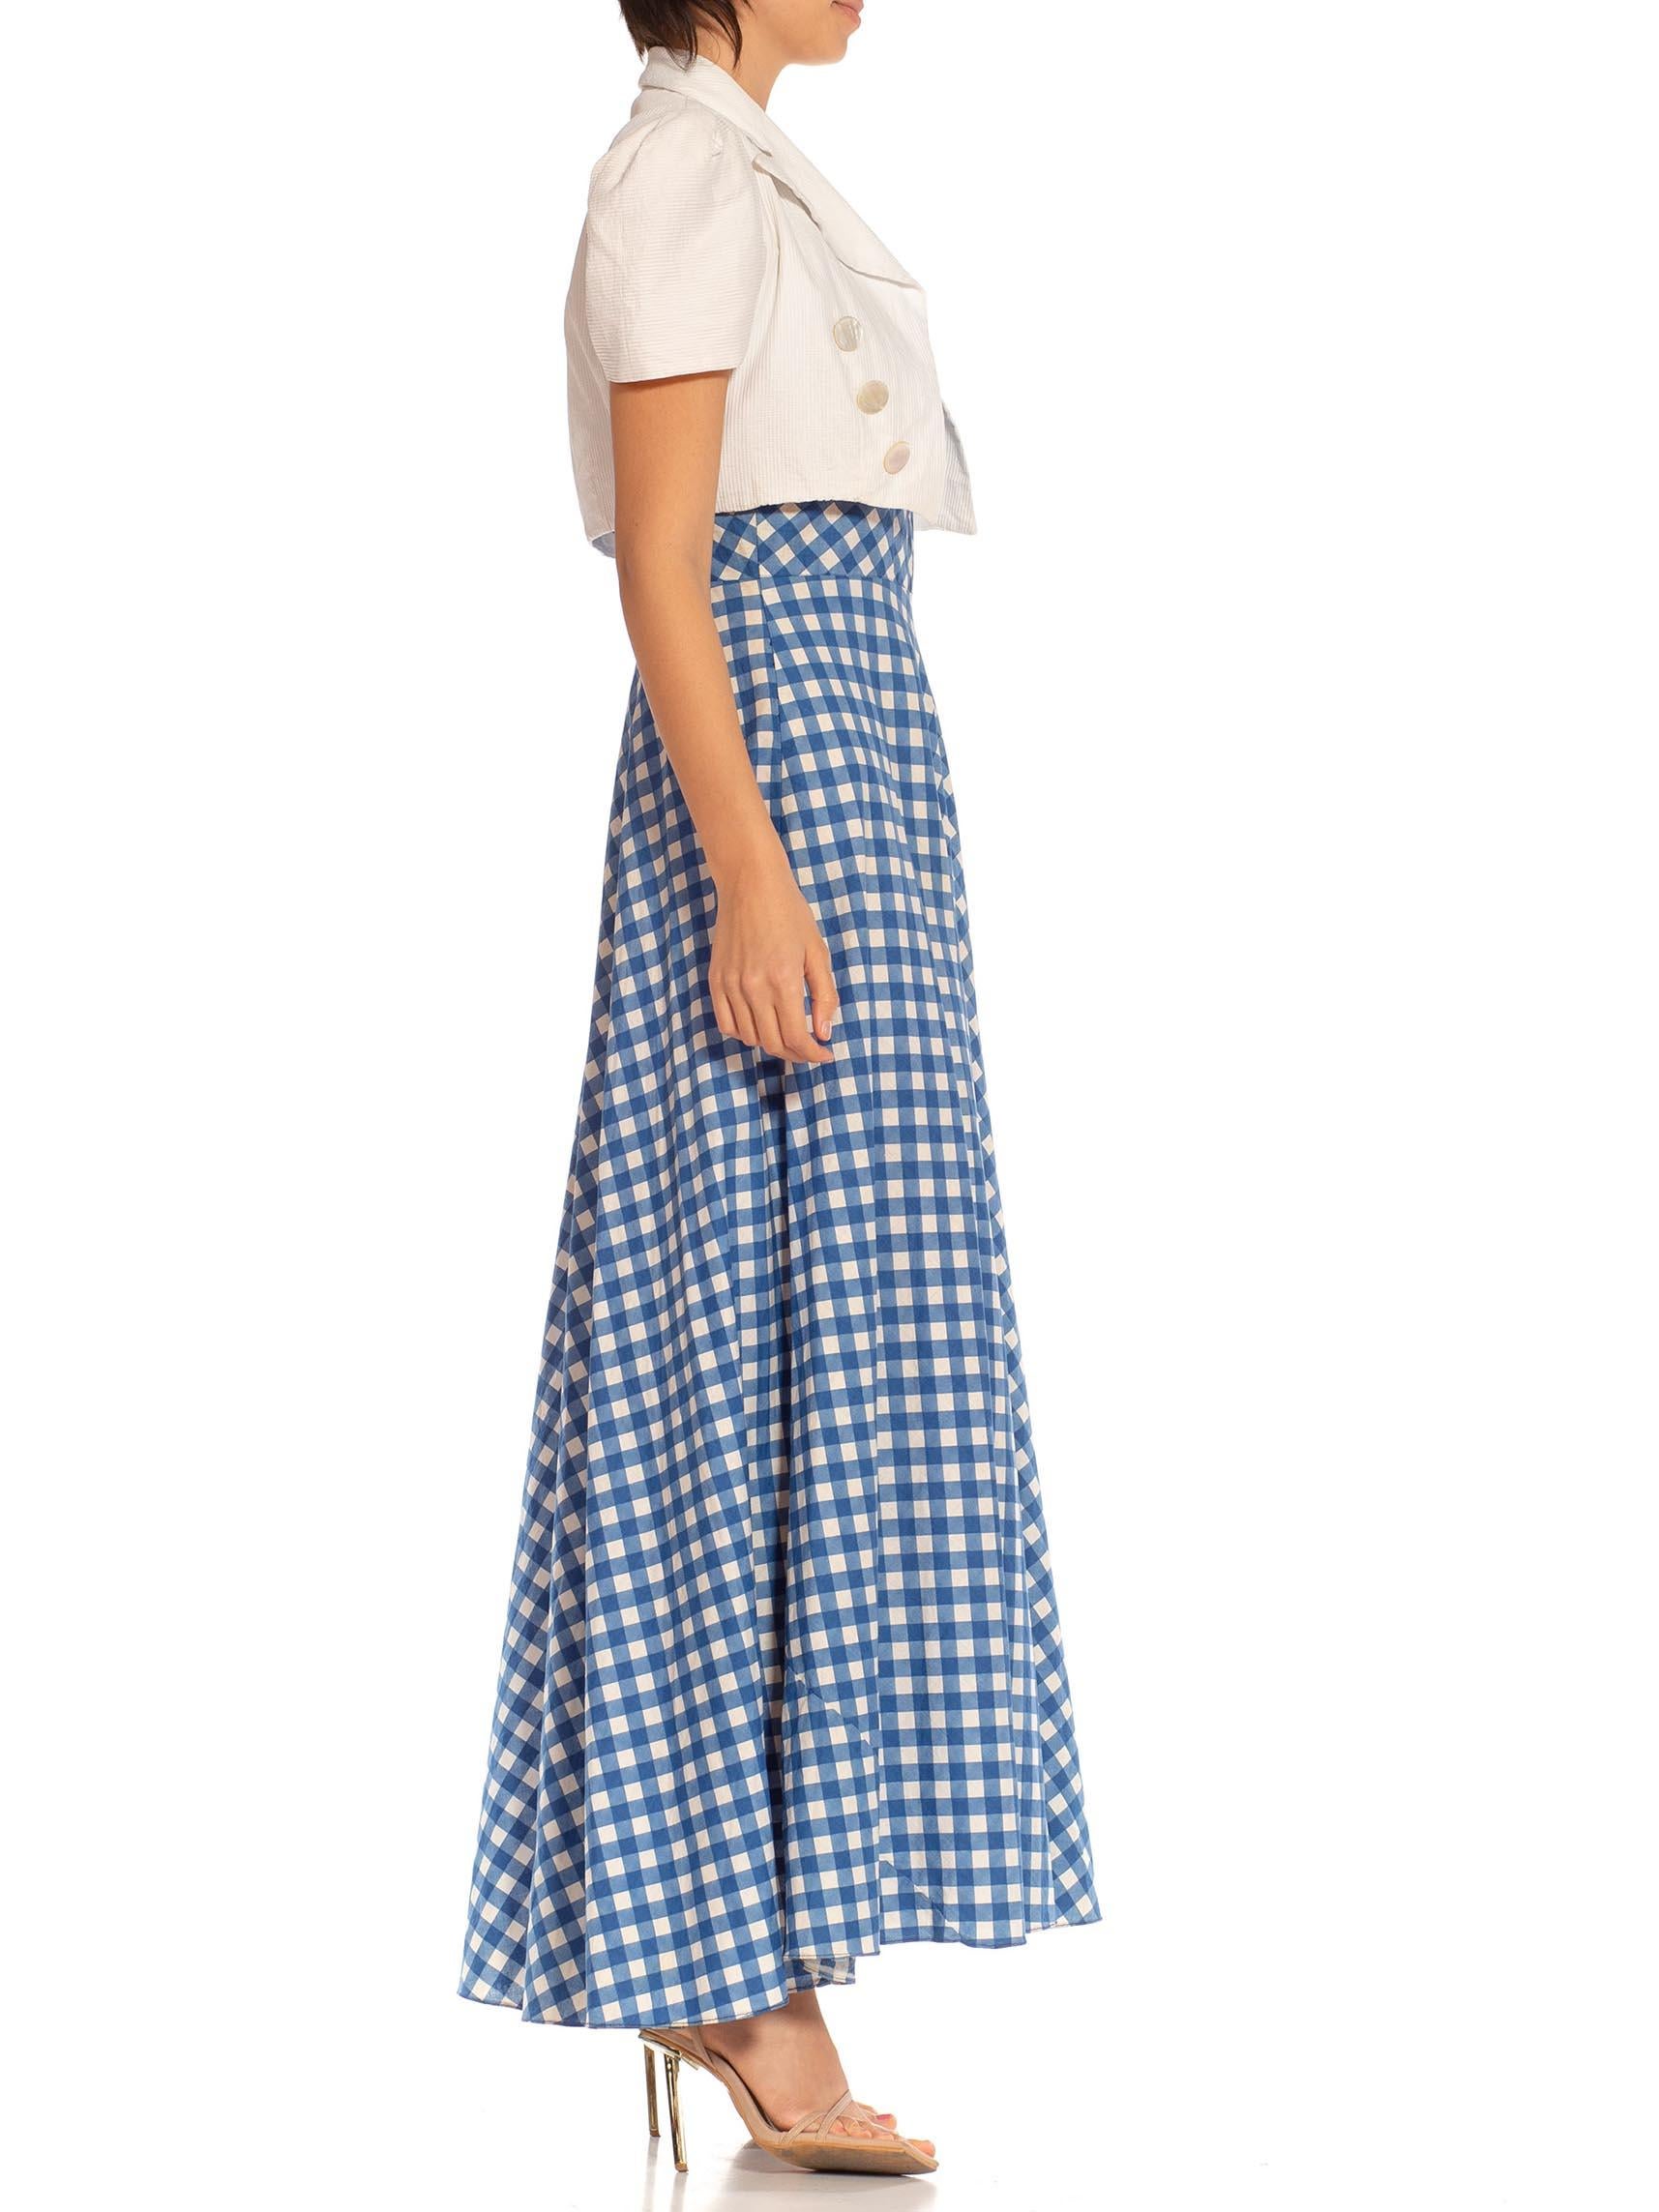 Some discoloration near side seam 1930S White & Blue Cotton Gingham Full Skirt Dress With Matching Jacket Deadstock NWT 